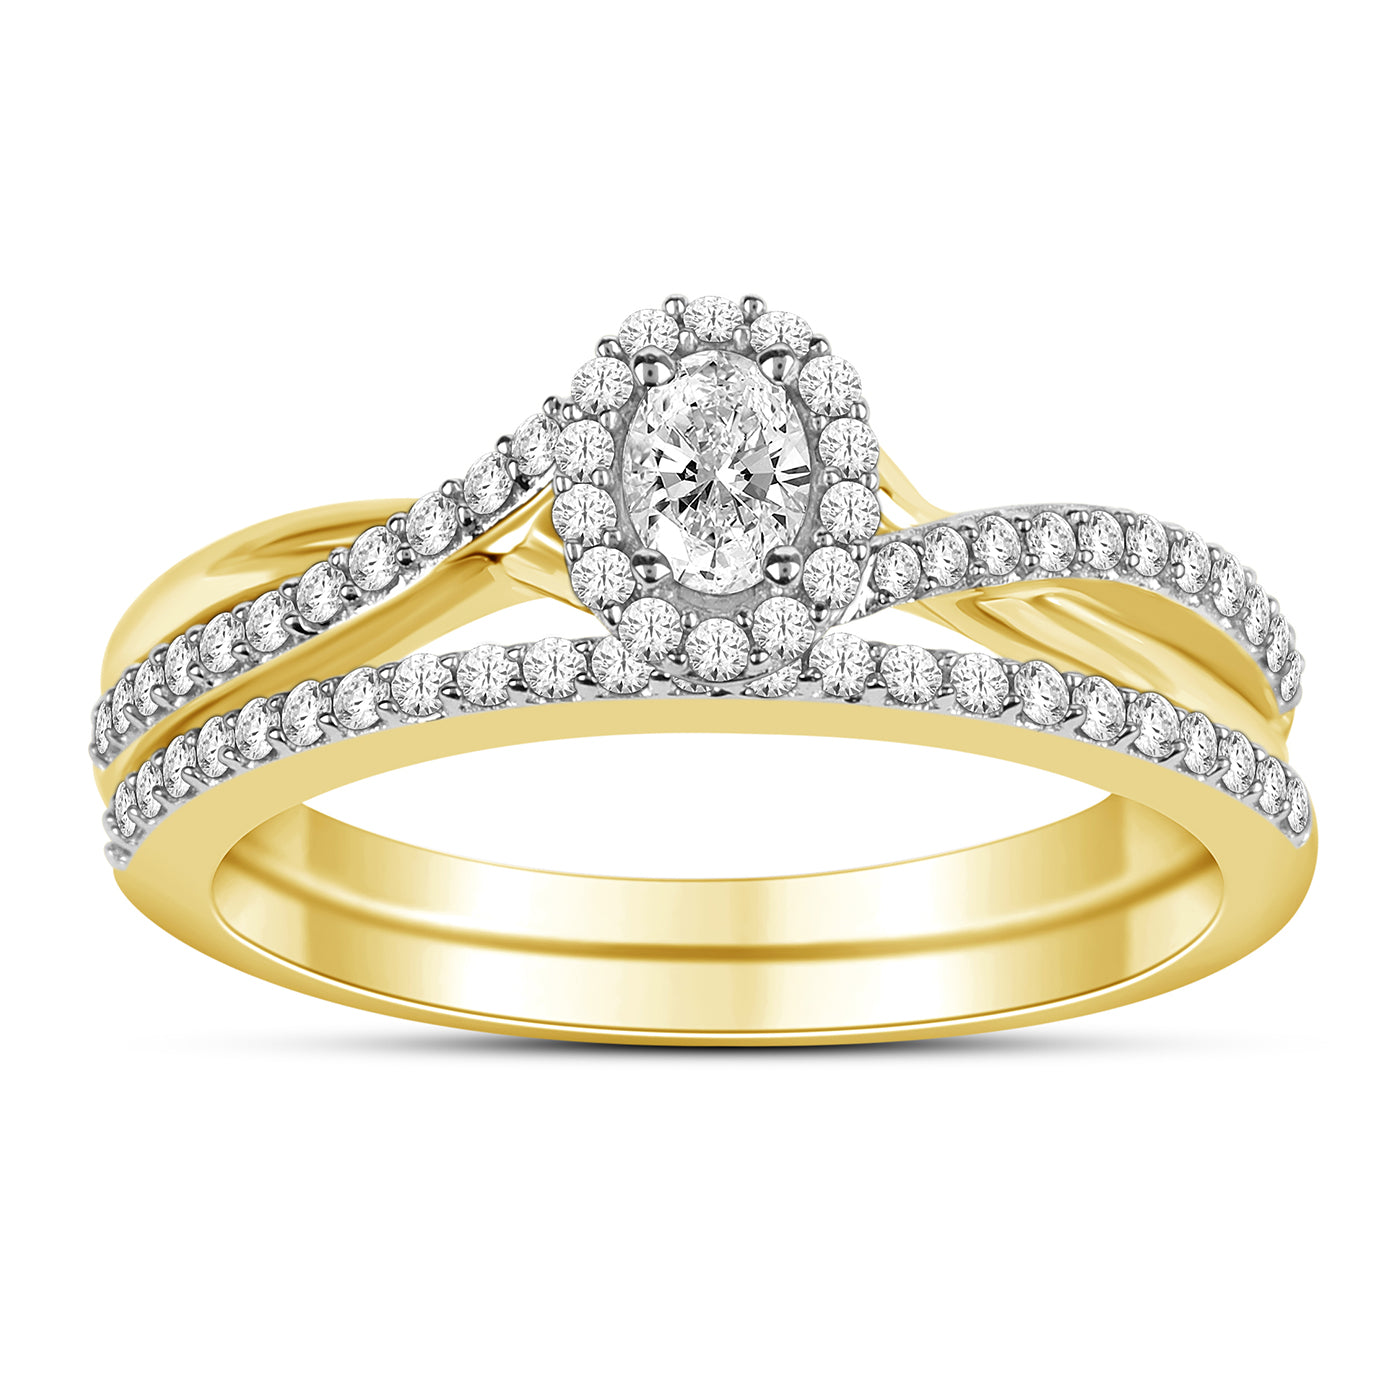 Solitaire Round Engagement / Promise Ring with 0.50 Carat TW of Diamonds in 14K Yellow Gold